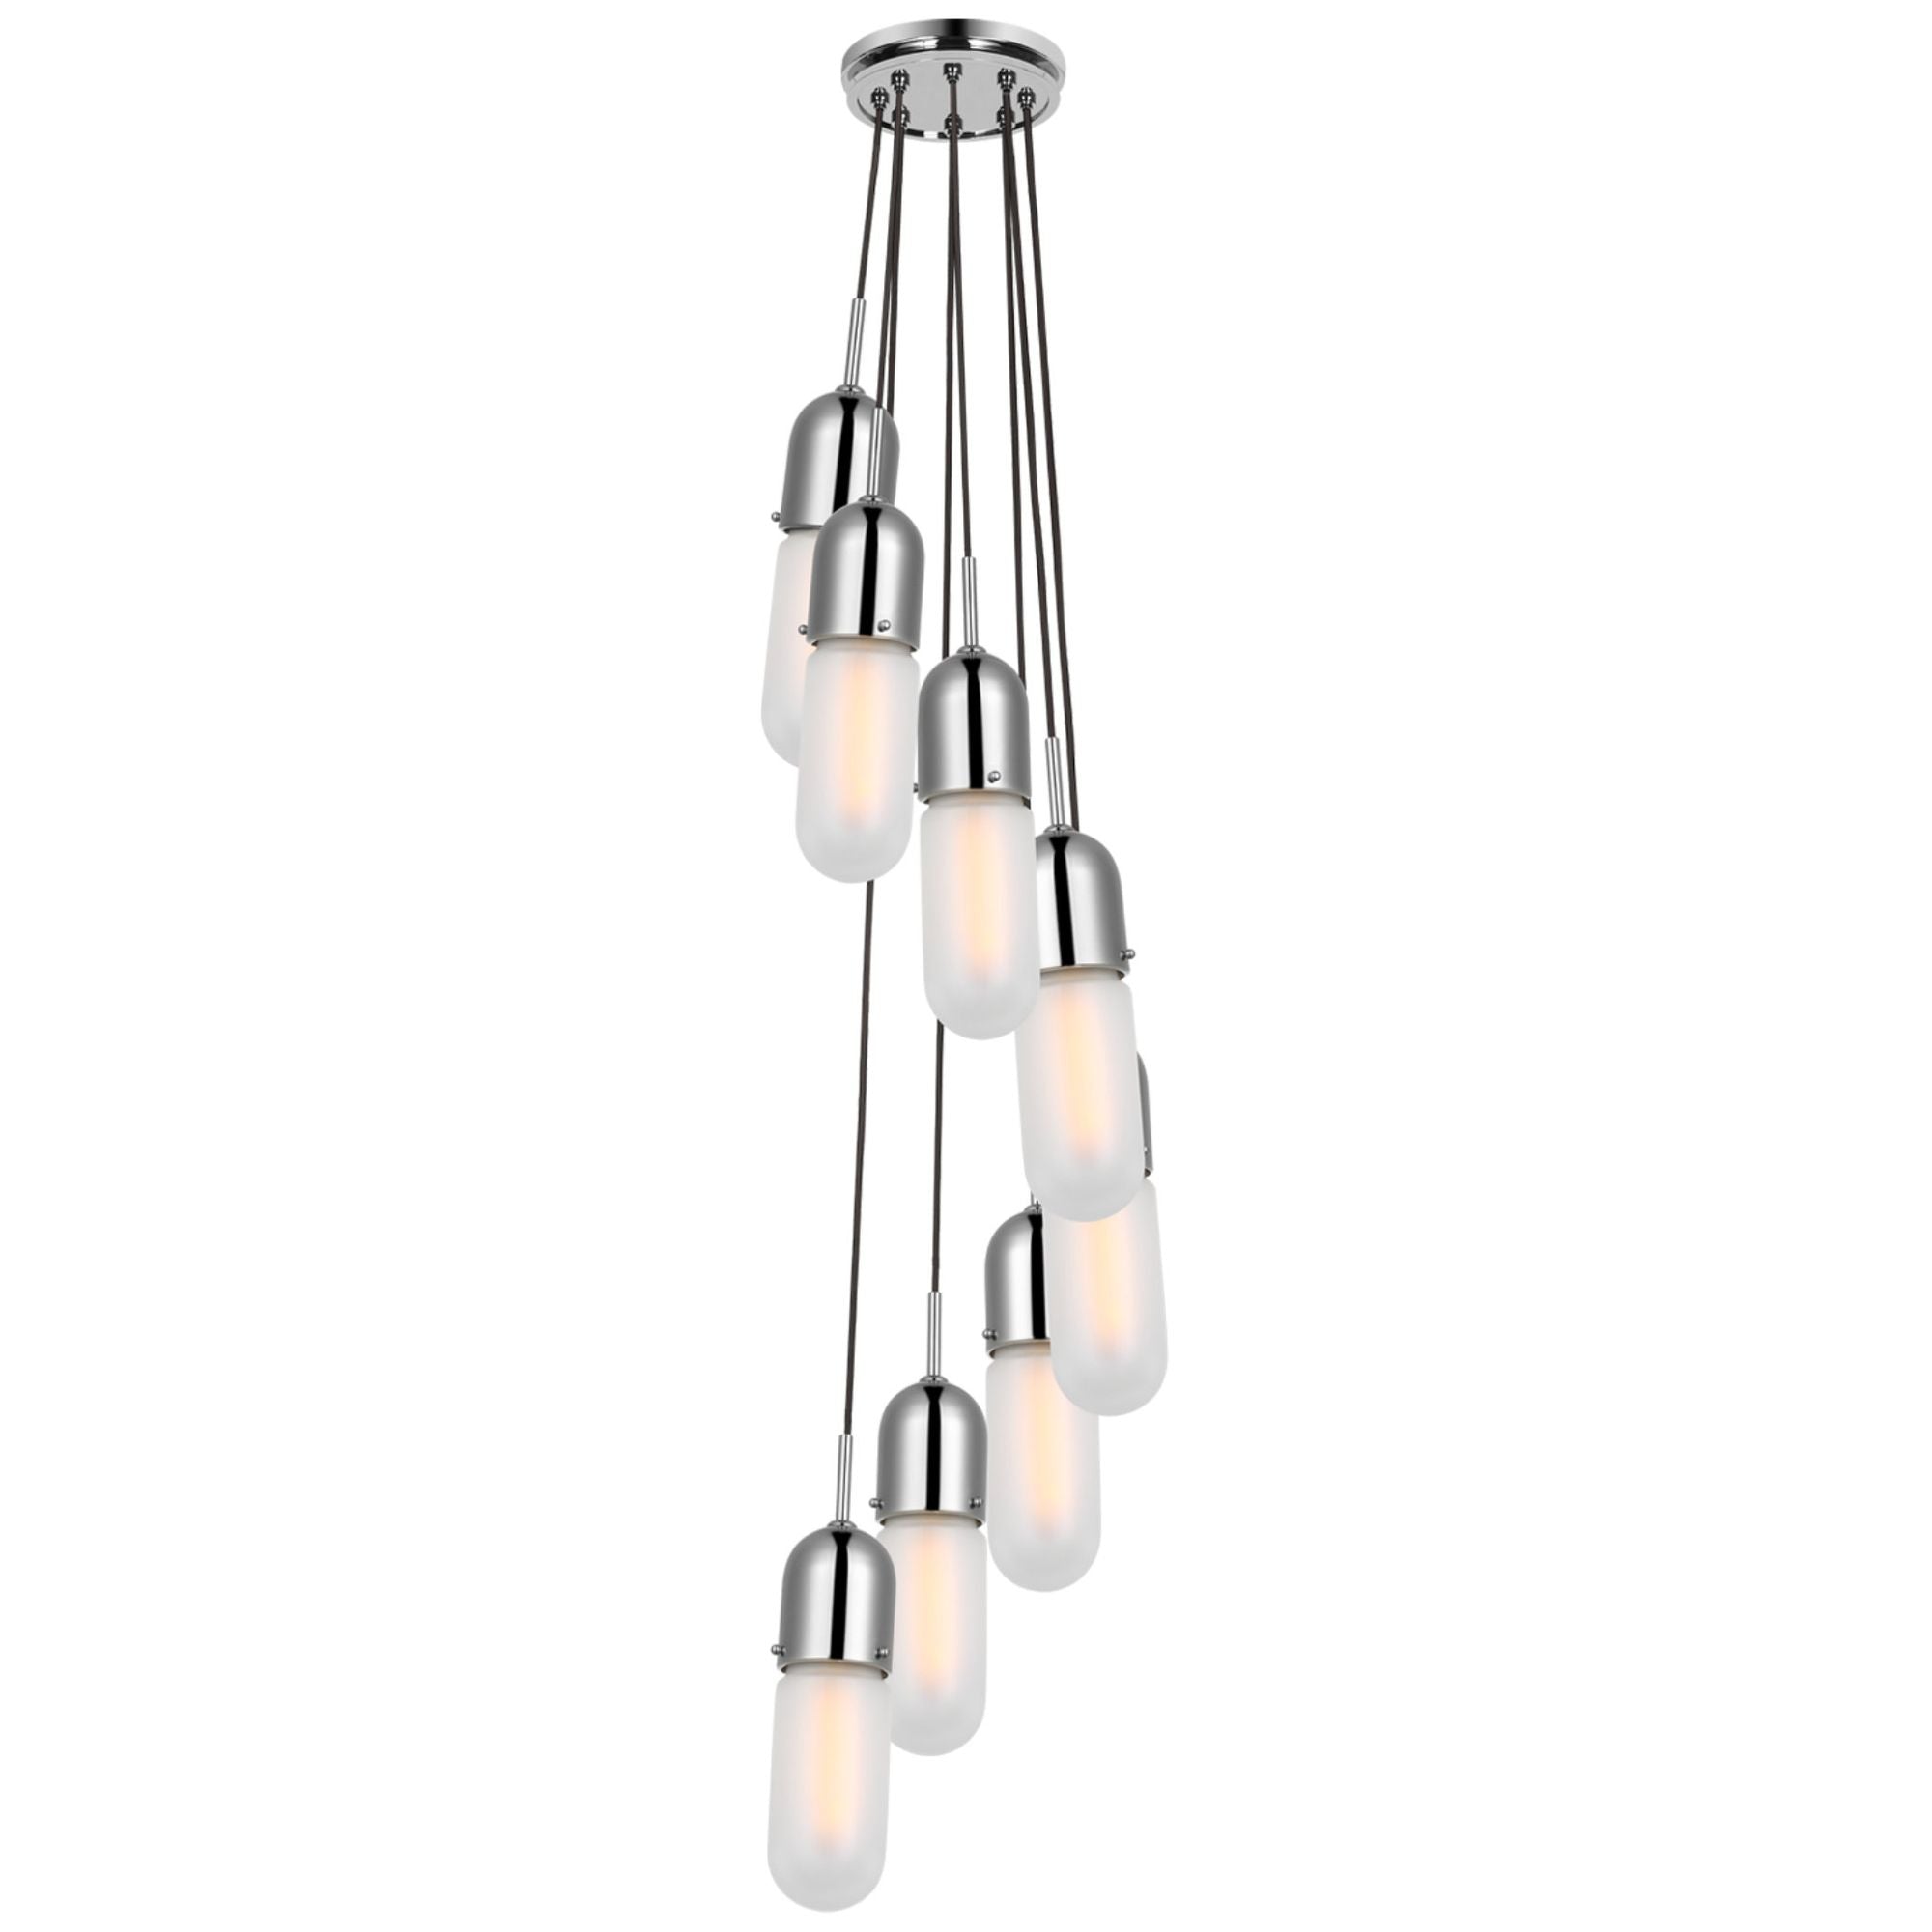 Thomas O'Brien Junio 8-Light Pendant in Polished Nickel with Frosted Glass